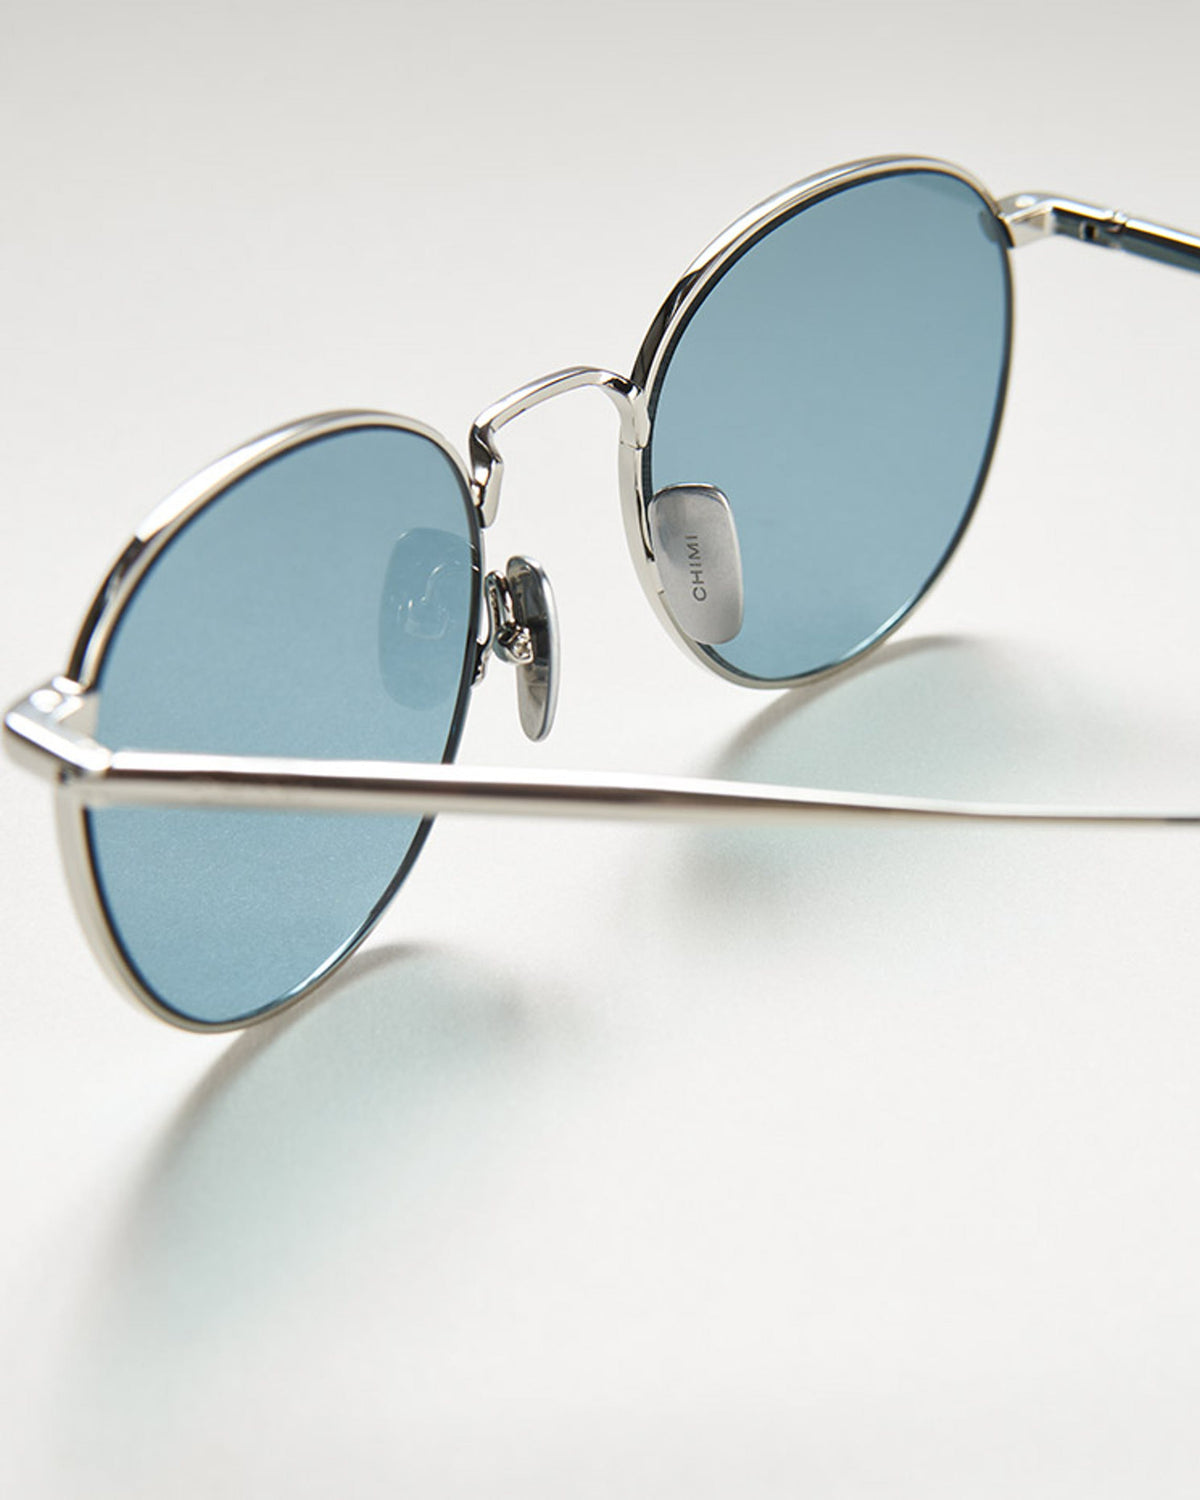 Steel frame round sunglasses with a blue lense